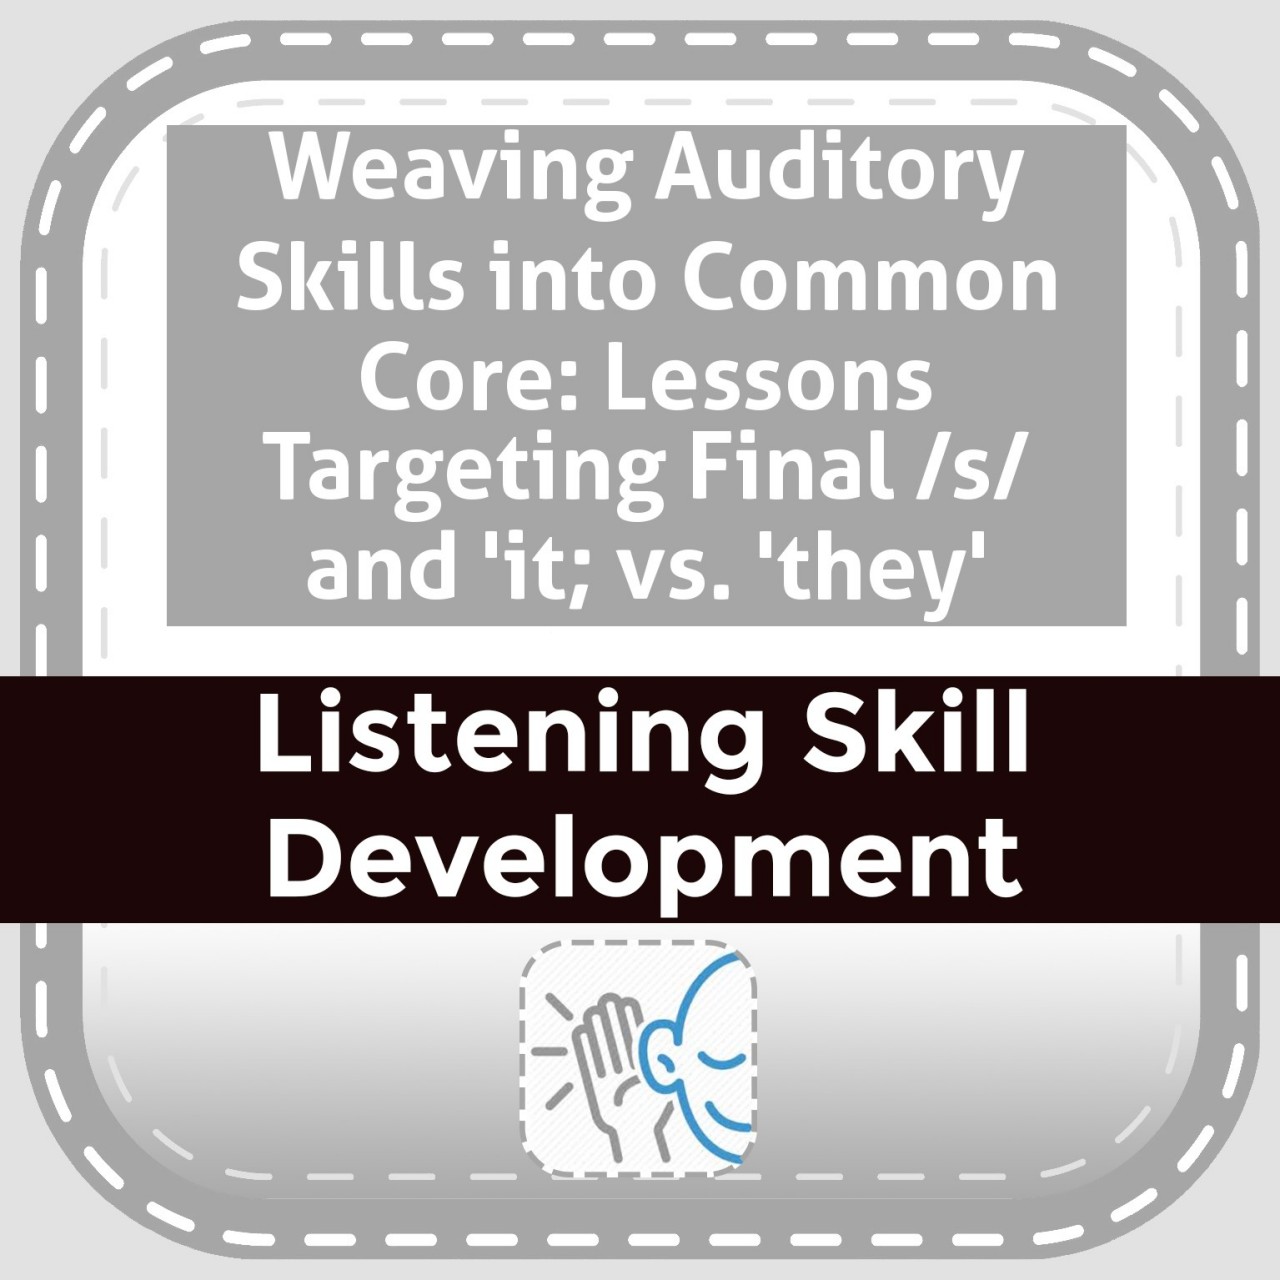 Weaving Auditory Skills into Common Core: Lessons Targeting Final /s/ and 'it; vs. 'they'